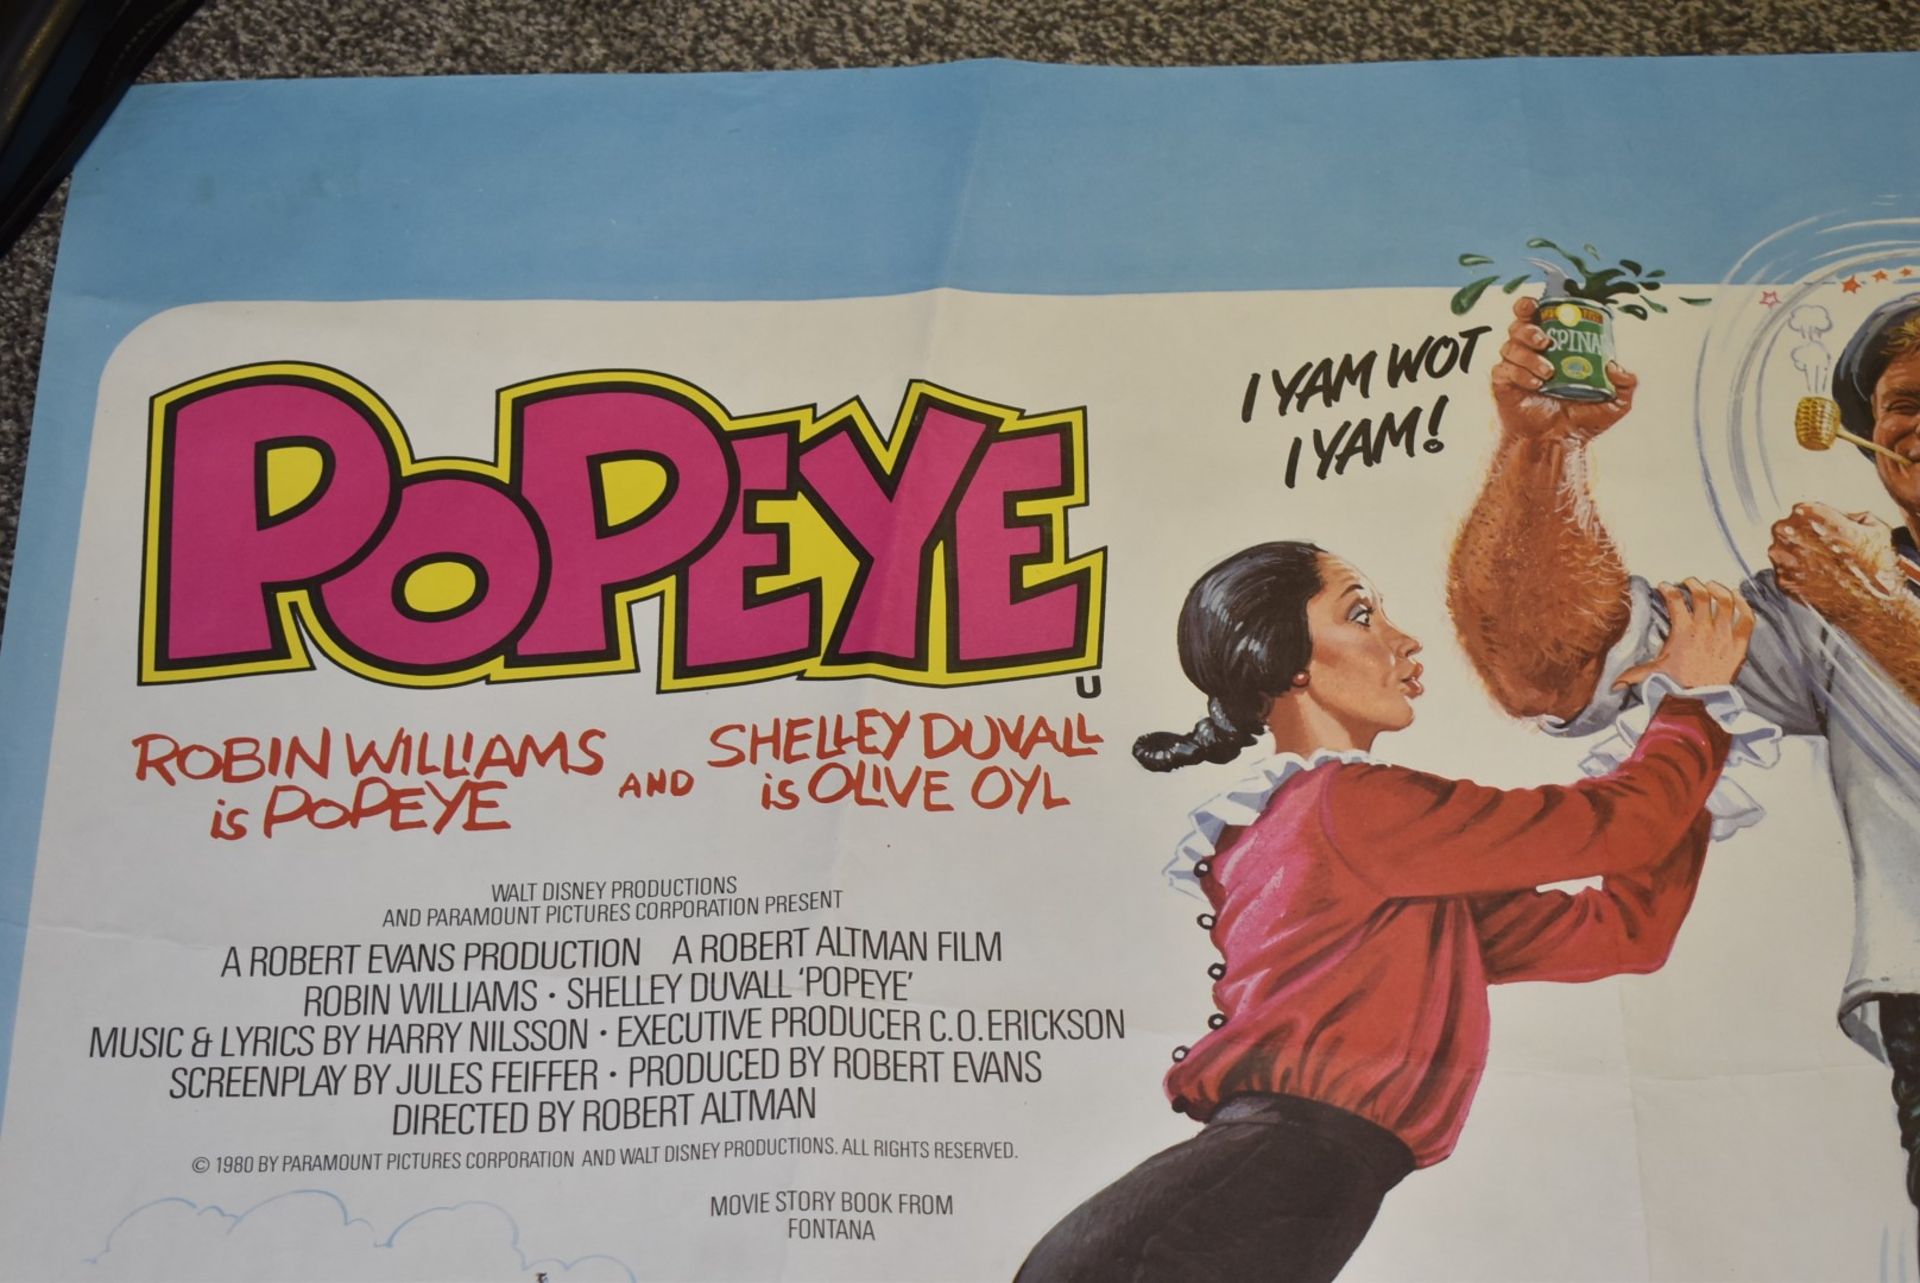 1 x Quad Movie Poster - POPEYE - Starring Robin Williams and Shelley Duvall - 1980 Film - Walt - Image 4 of 8